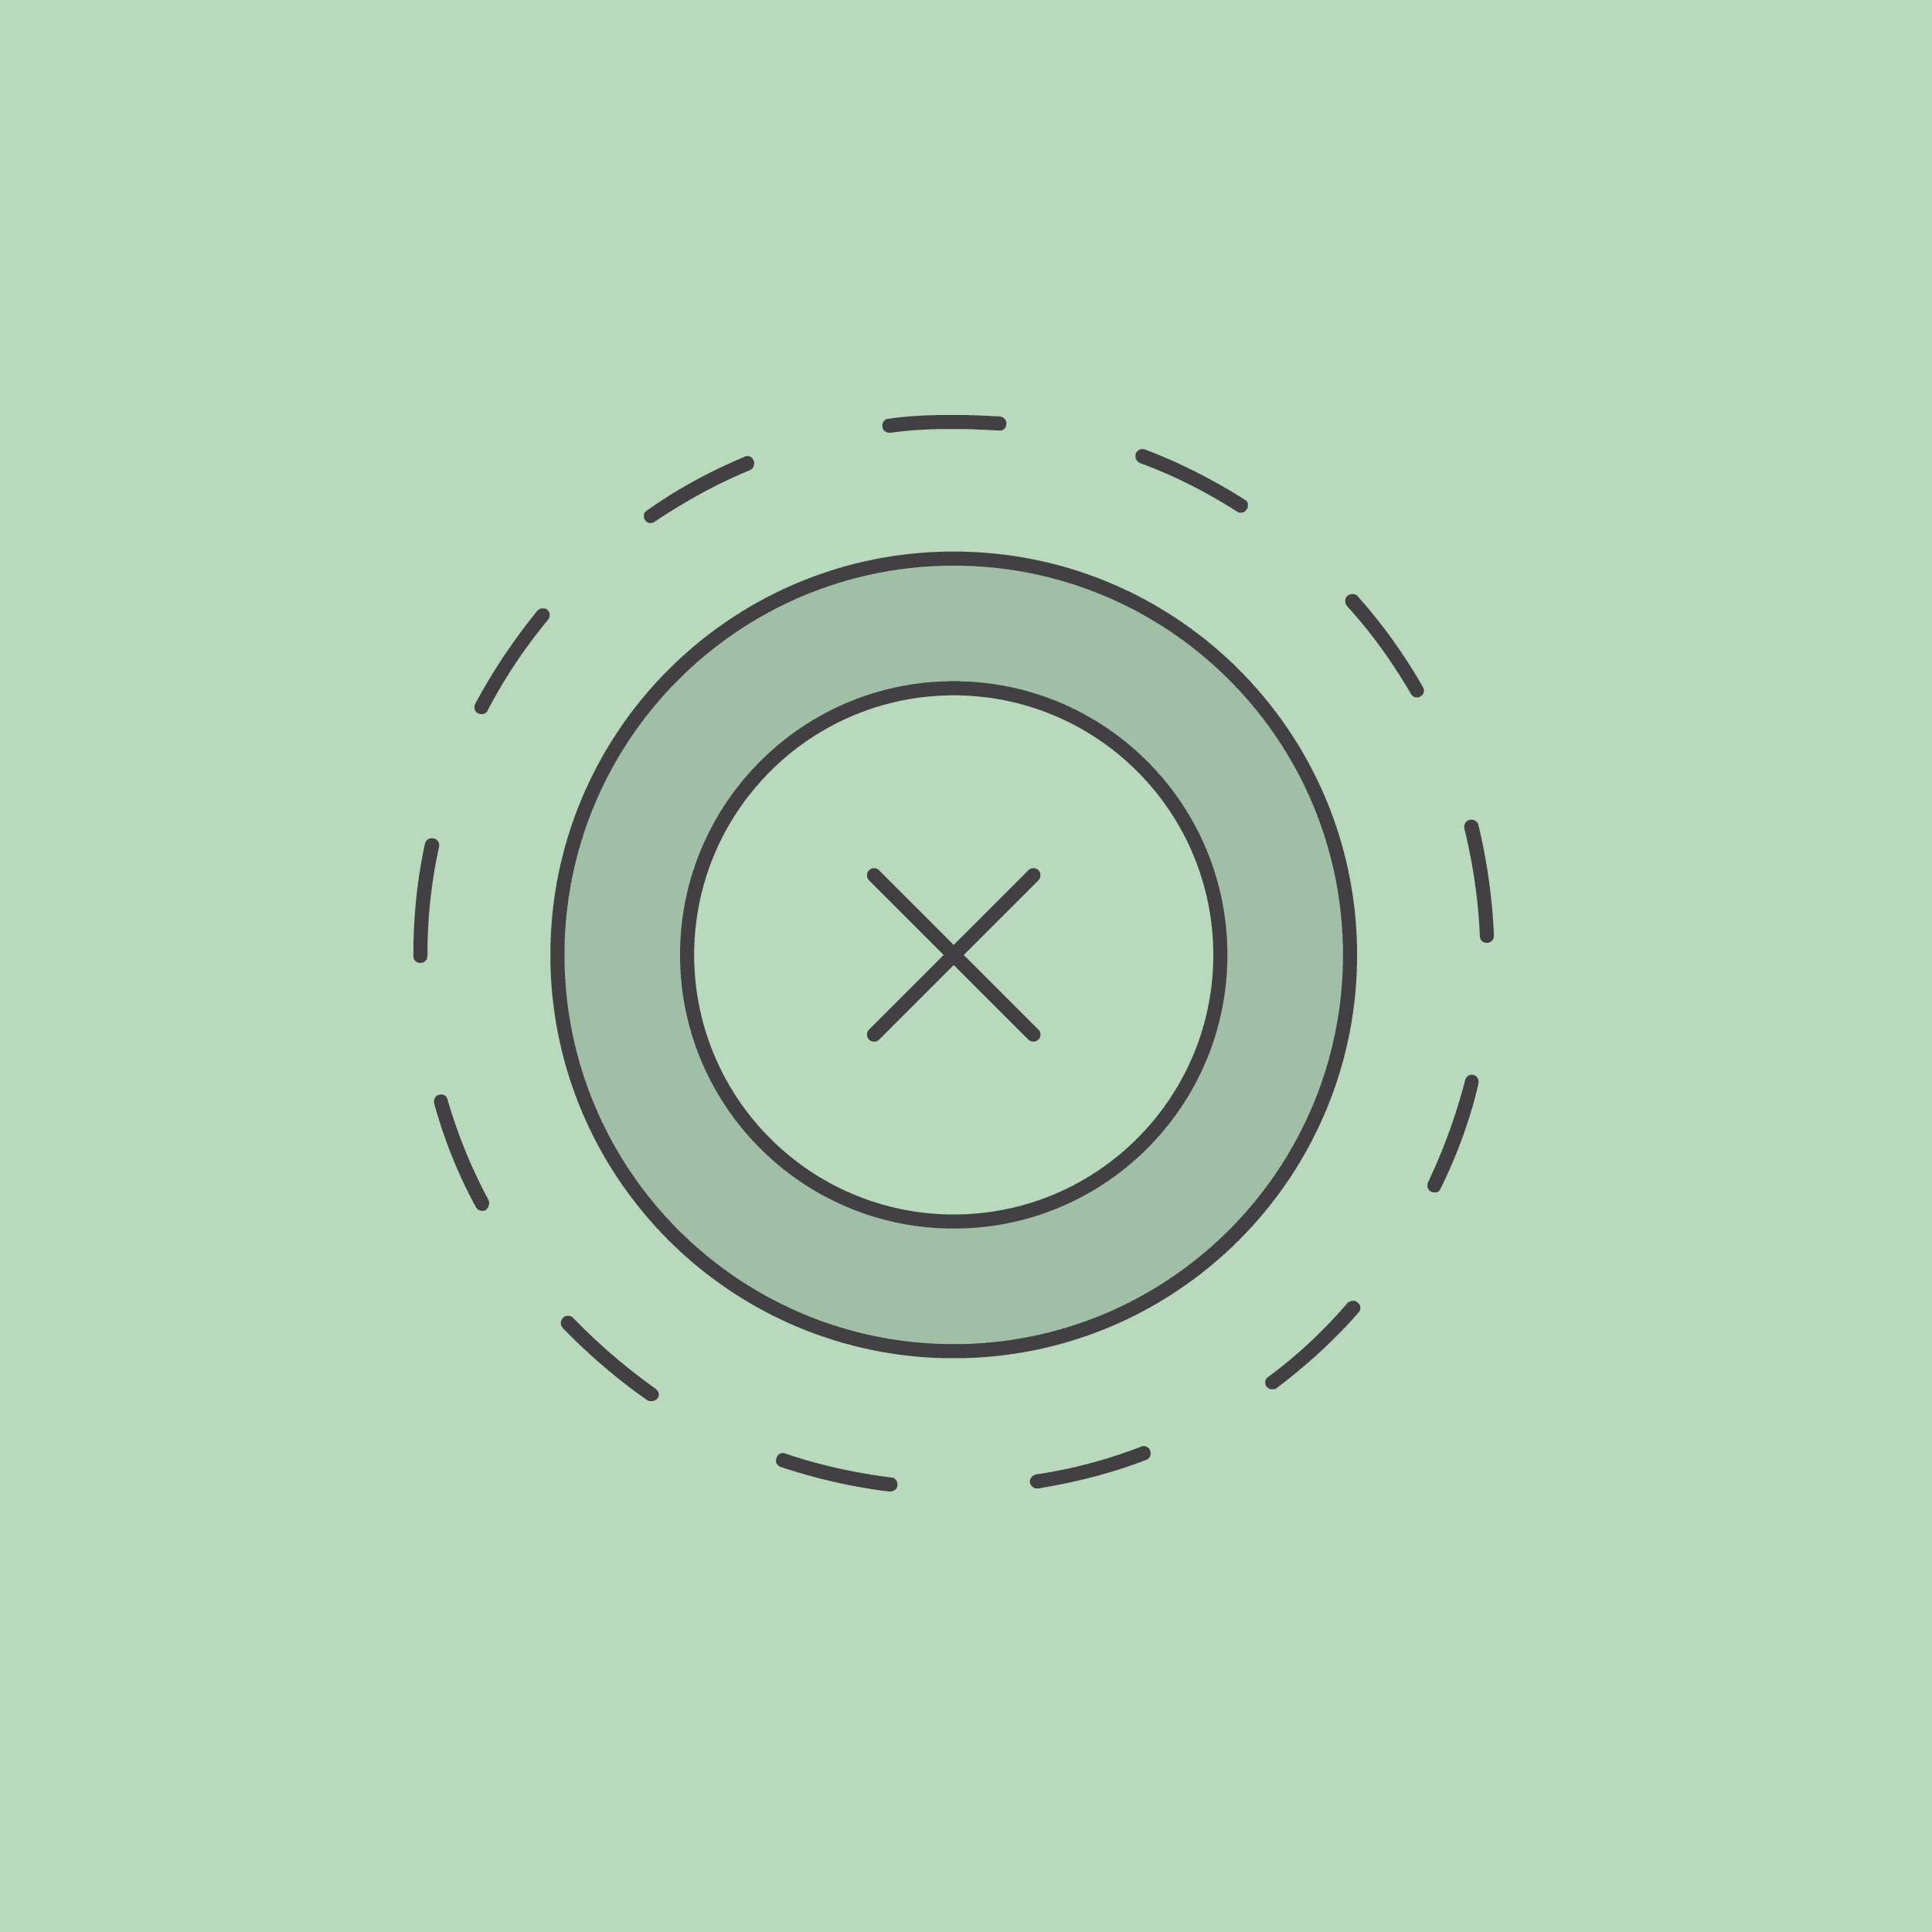 Circles made of dashes and lines with x in middle